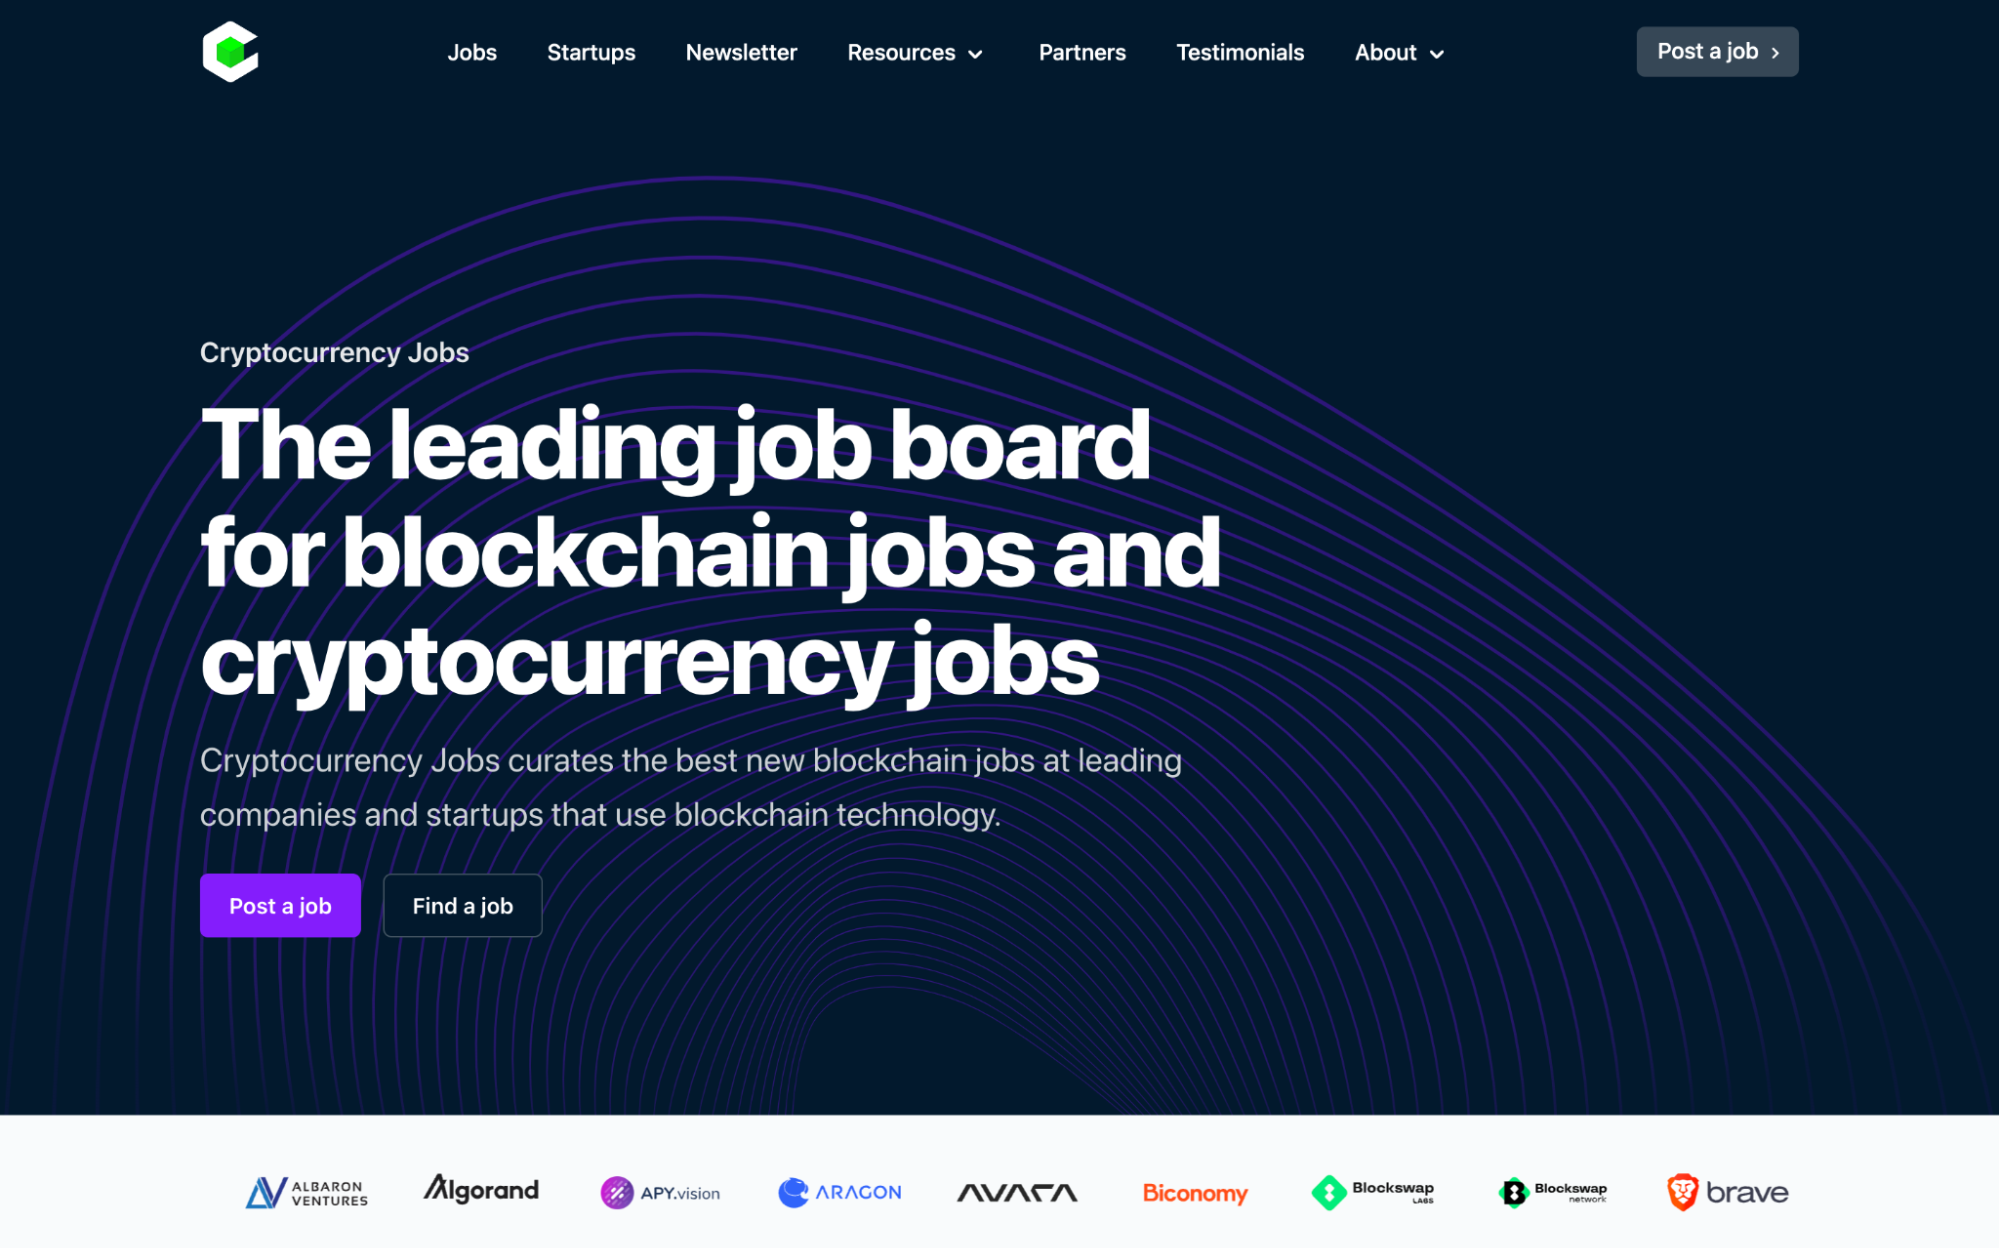 cryptocurrencyjobs-landing-page.png